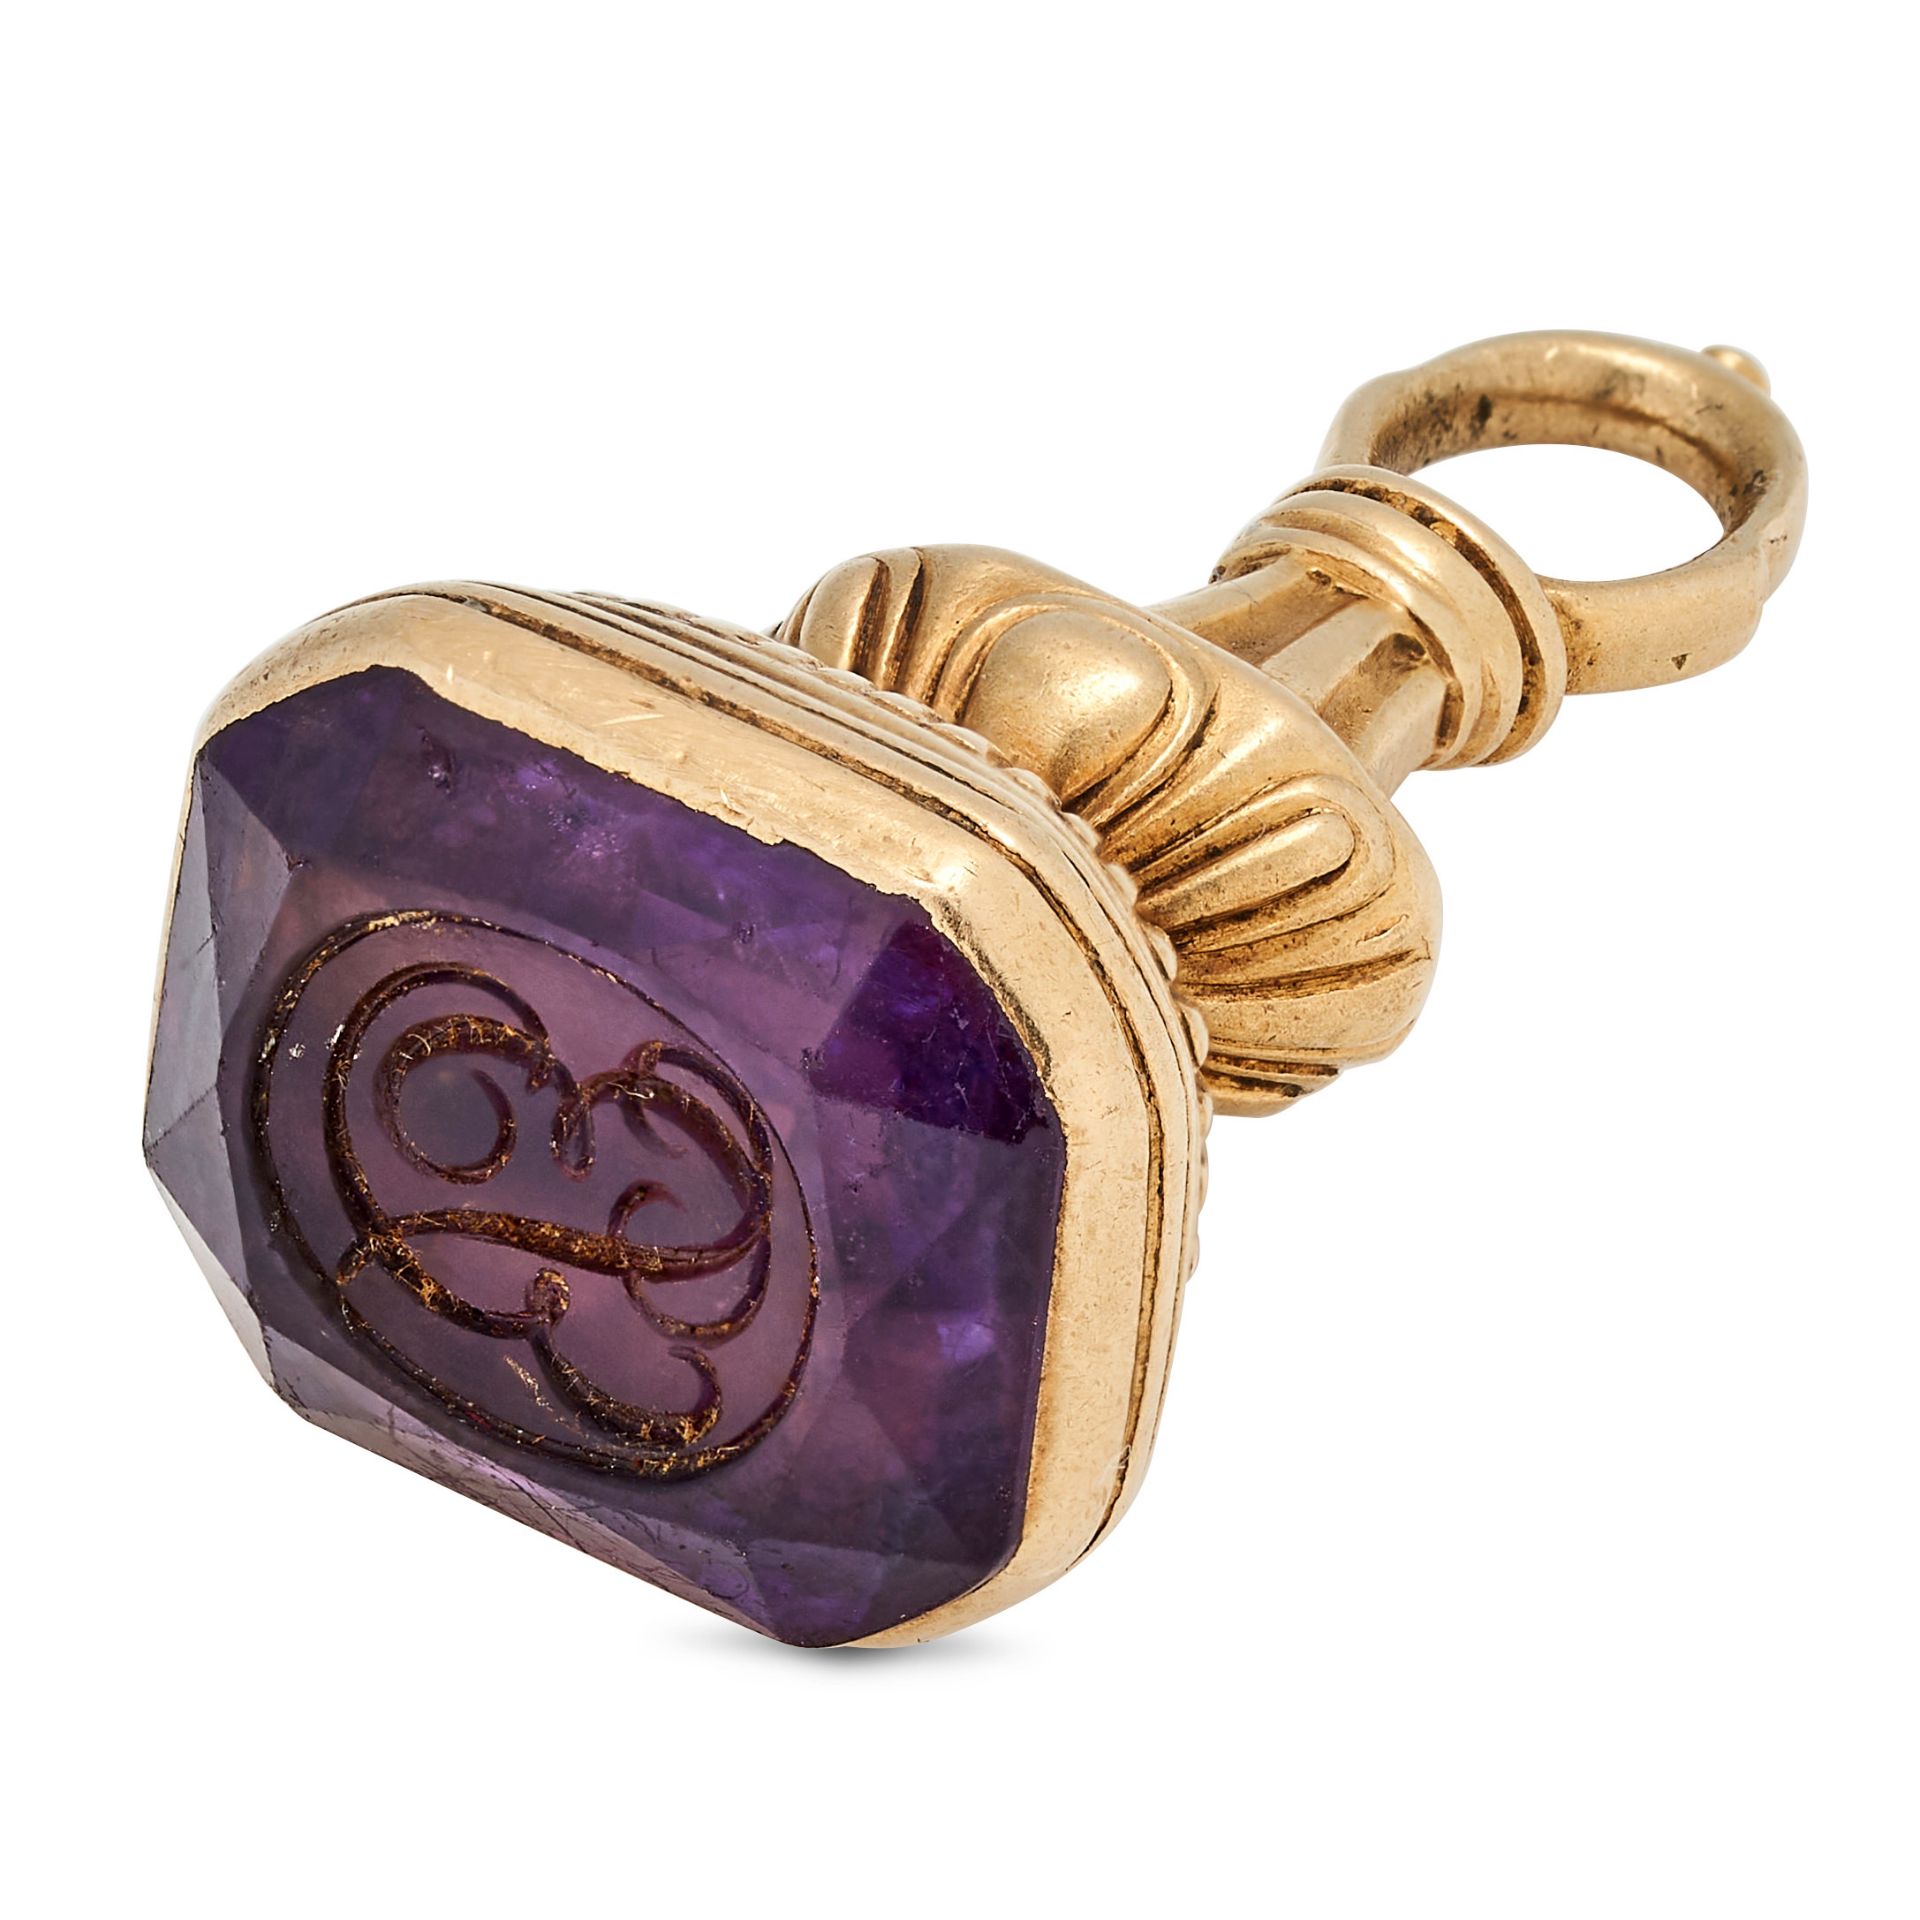 NO RESERVE - AN ANTIQUE AMETHYST INTAGLIO FOB SEAL PENDANT the fluted seal set with an amethyst i...